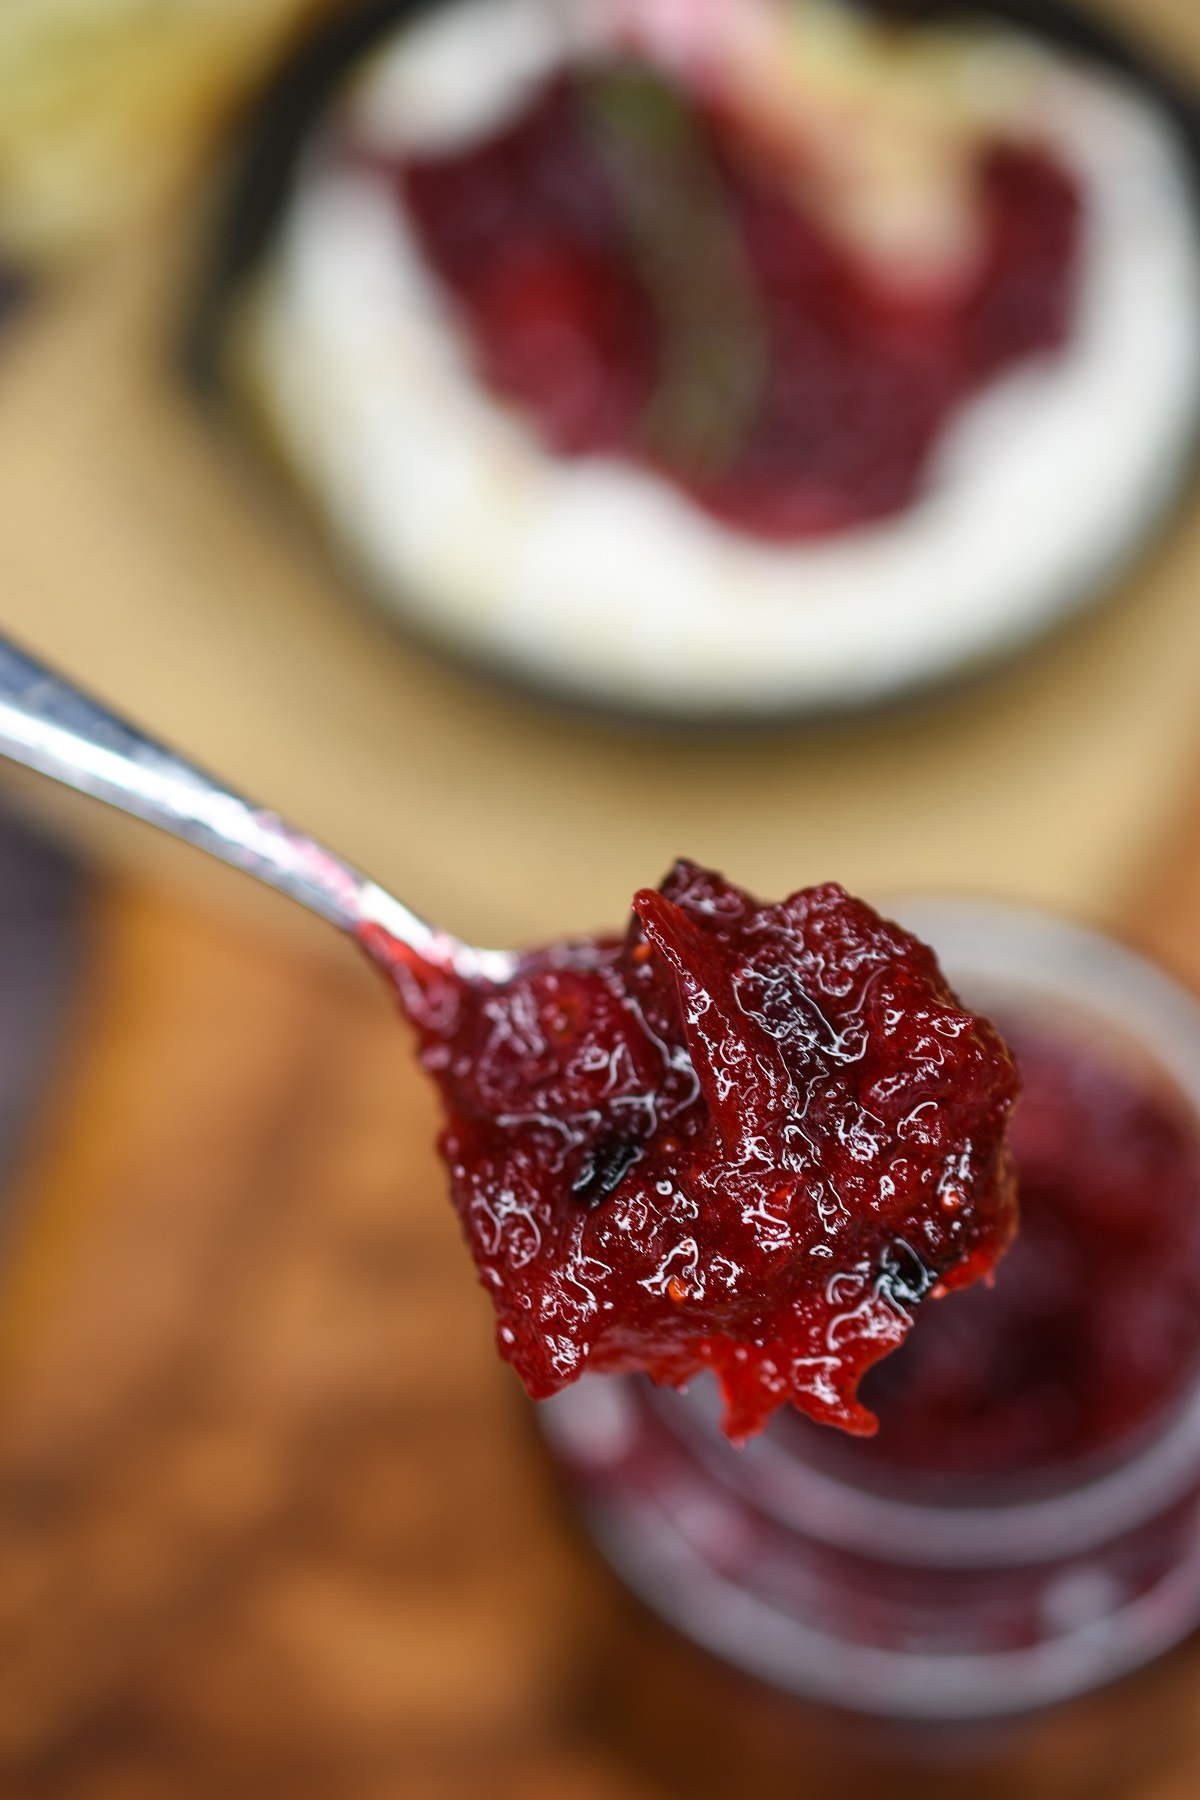 Homemade Cranberry Jam recipe. An easy & delicious holiday recipe. Shown Cranberry Jam on a spoon.